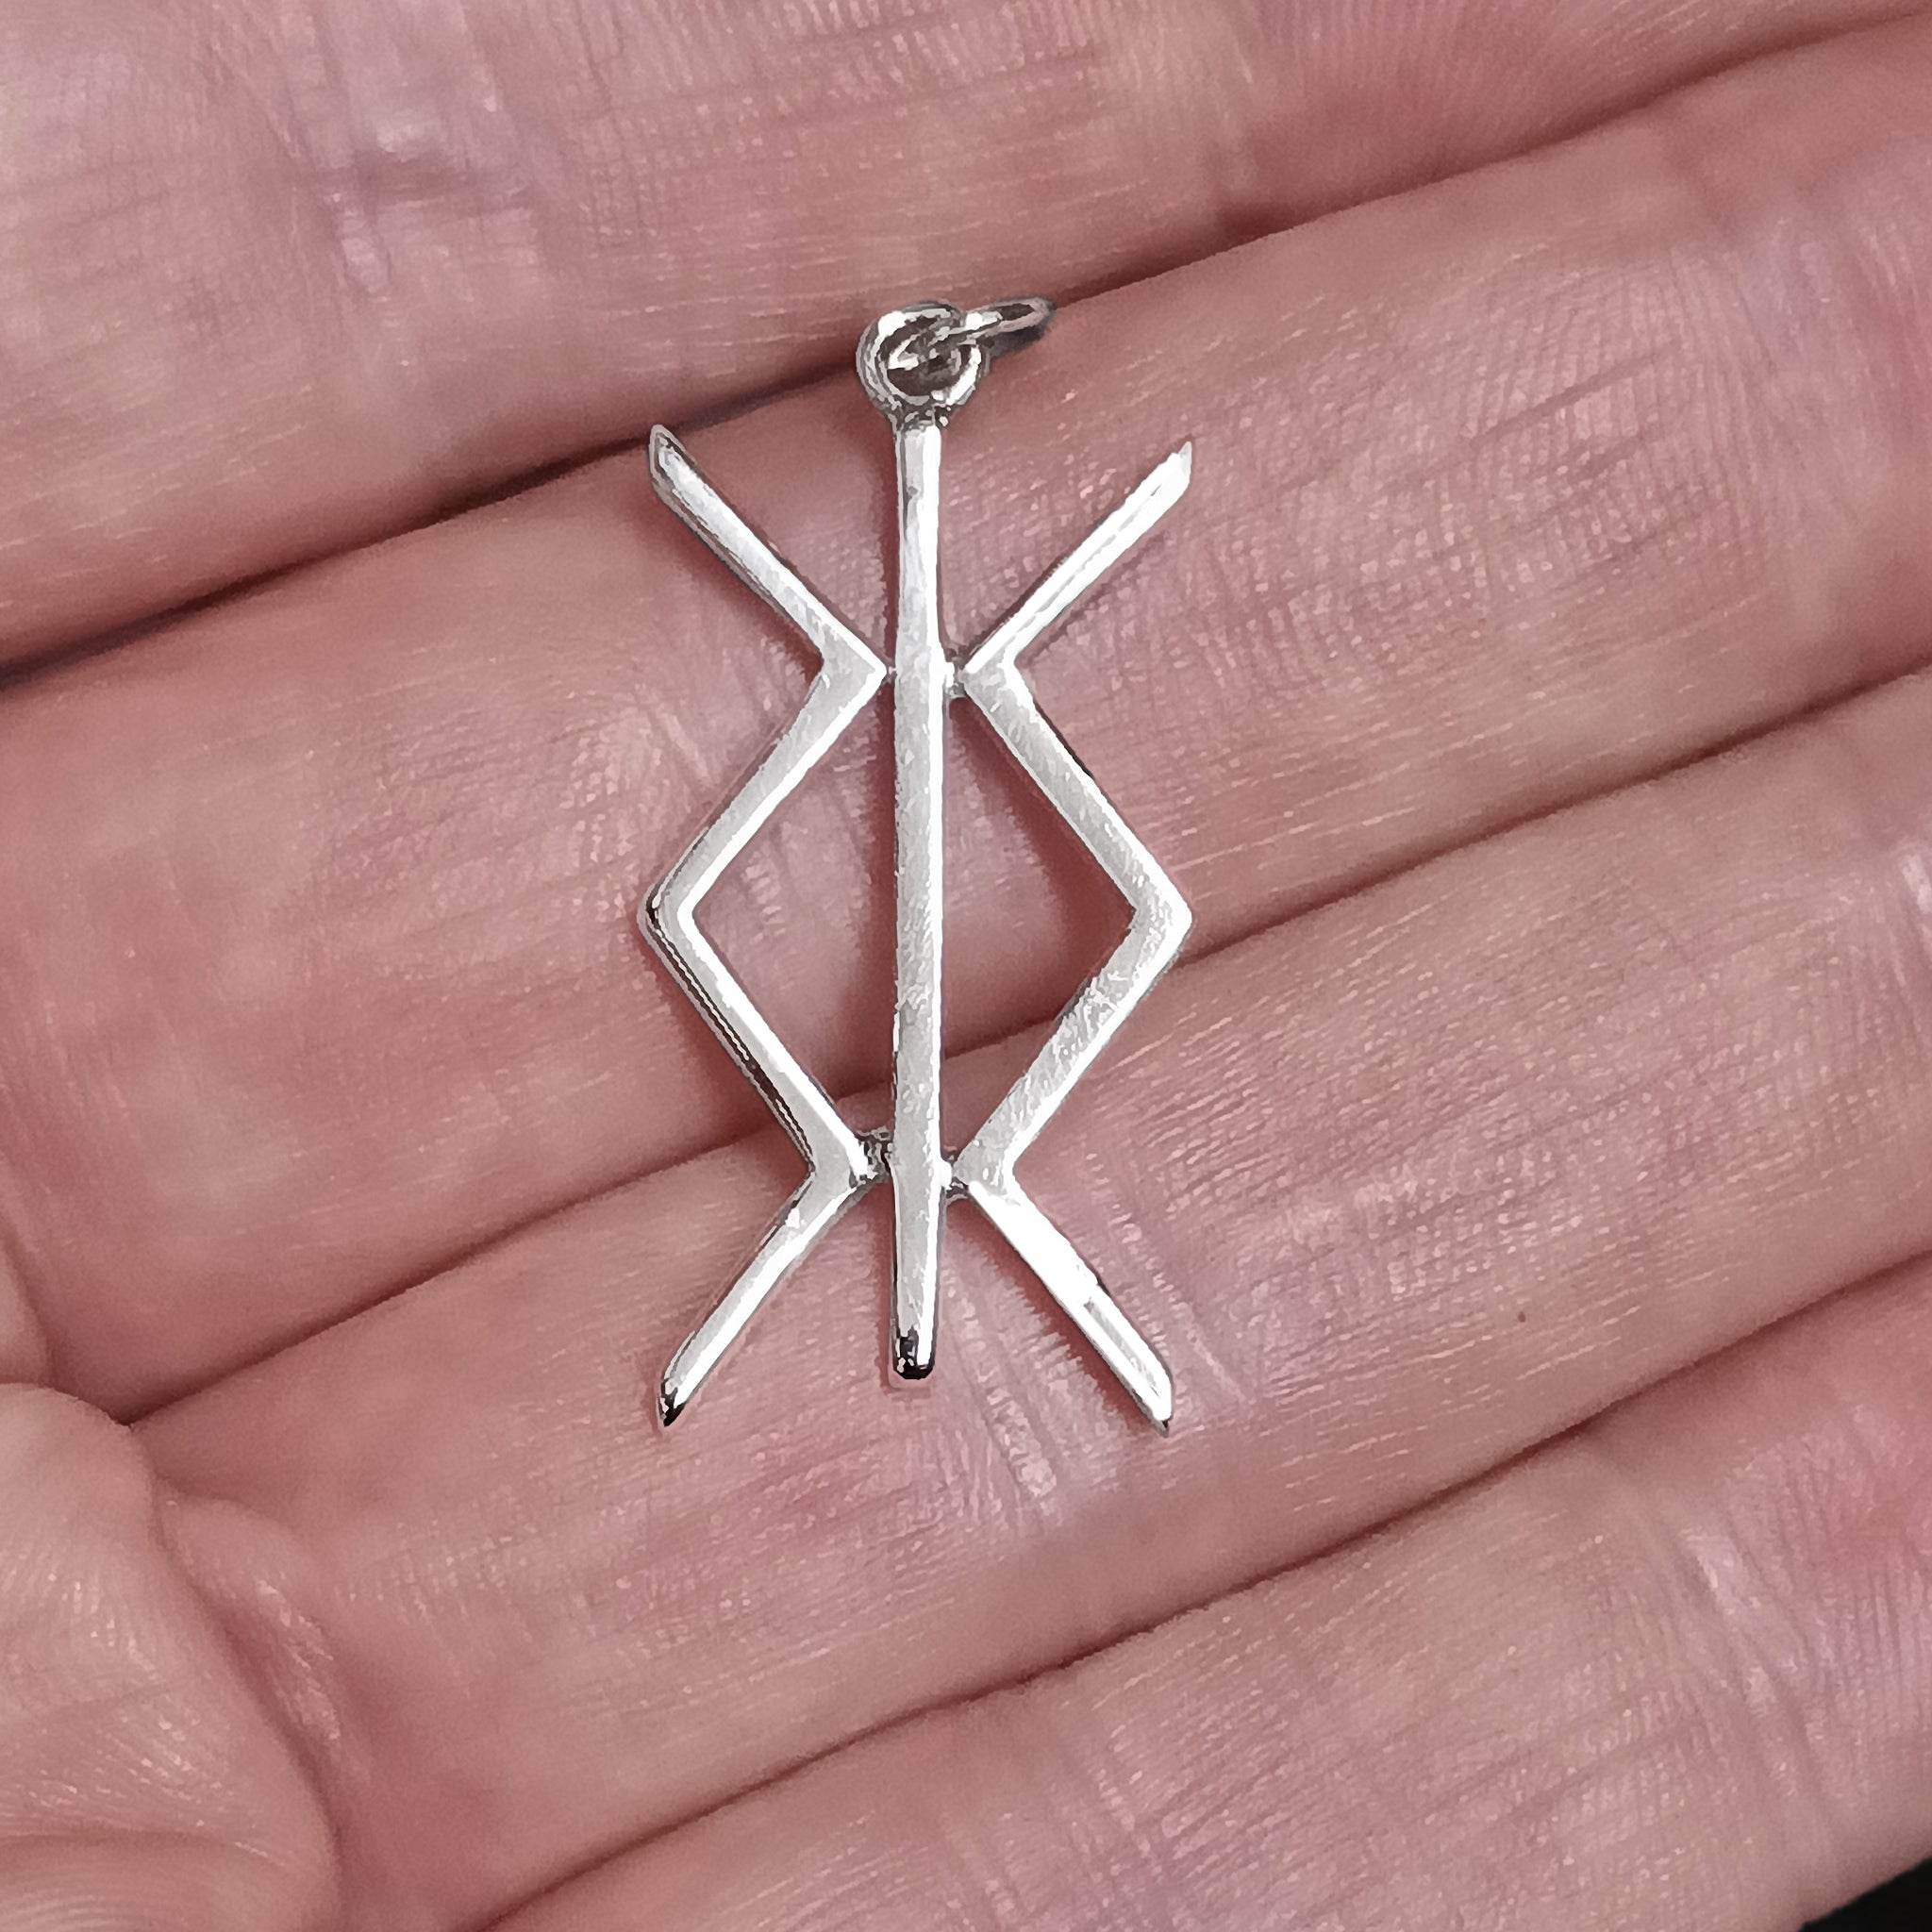 Silver Protection Bind Rune Viking Pendant on Hand